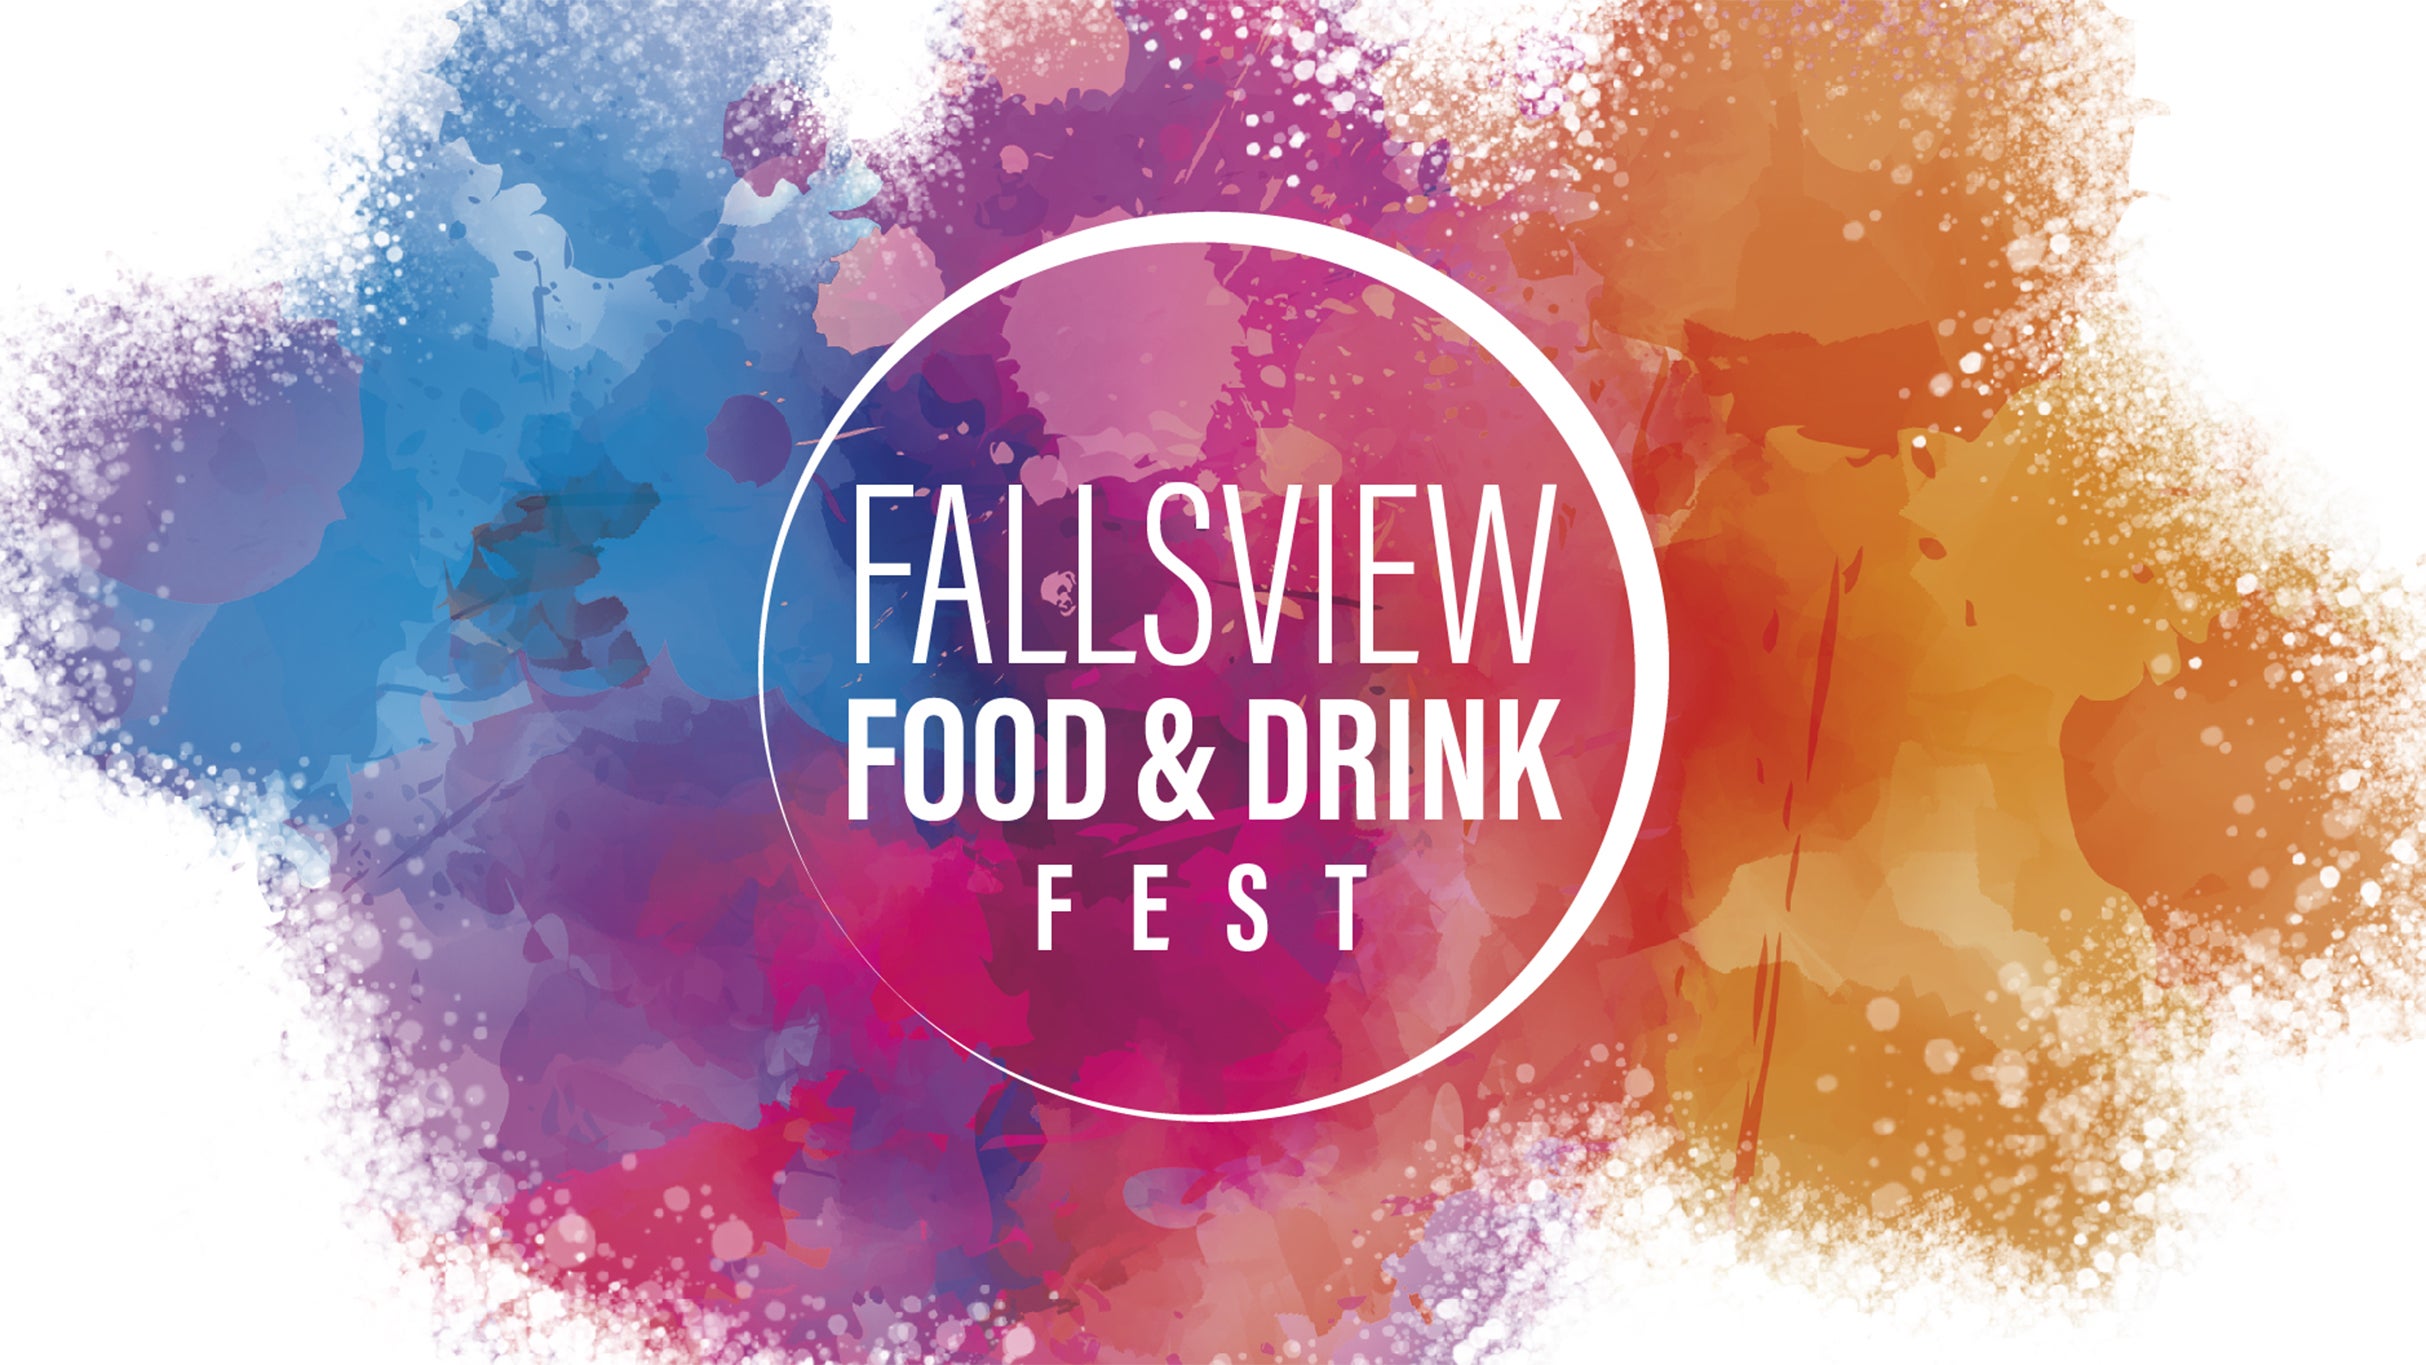 Fallsview Food & Drink Fest - Celebrity Chef Dine About in Niagara Falls promo photo for Community presale offer code